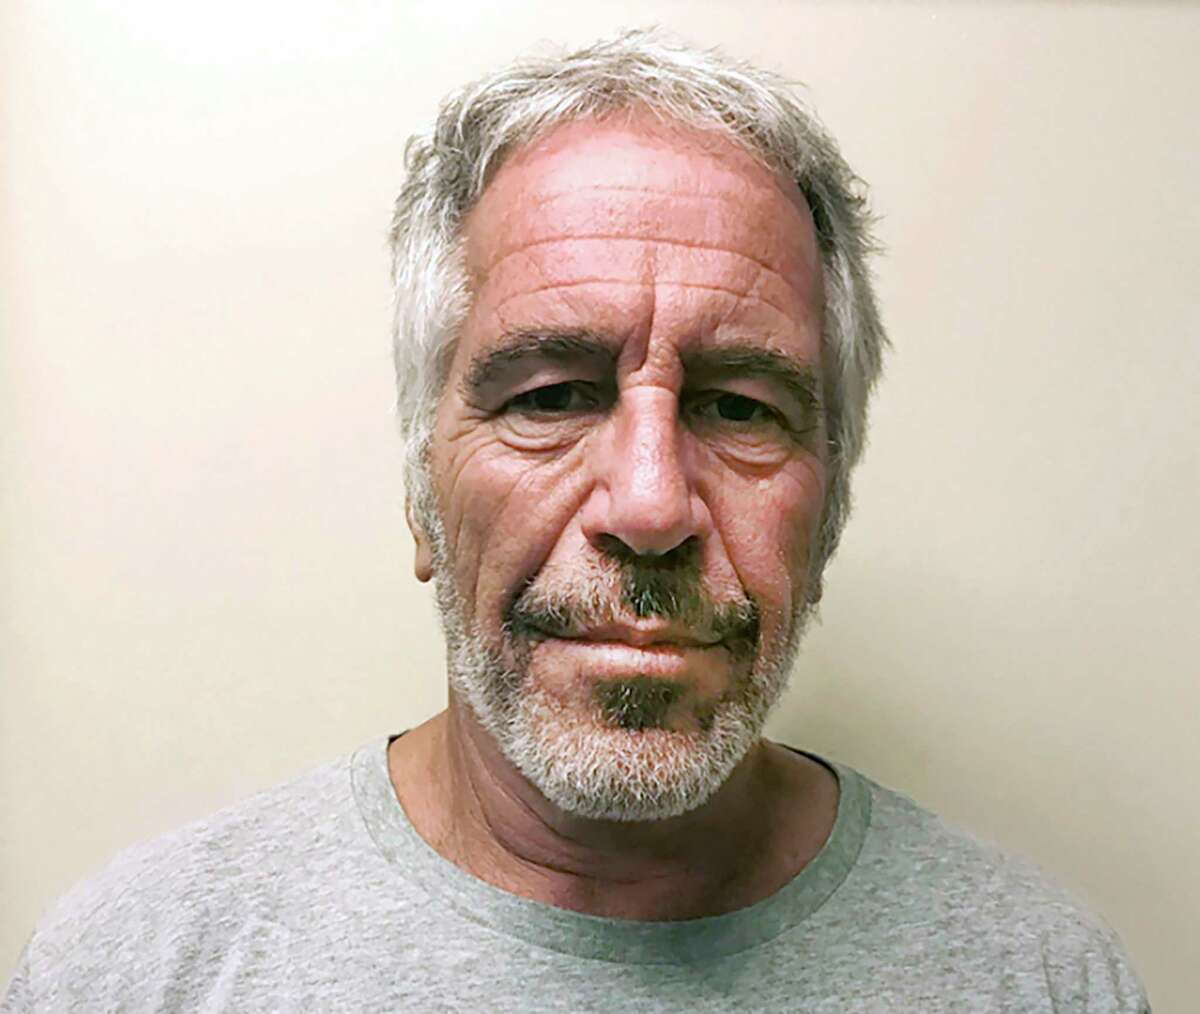 FILE - This March 28, 2017, photo provided by the New York State Sex Offender Registry shows Jeffrey Epstein. JPMorgan Chase is defending itself against a lawsuit by the U.S. Virgin Islands accusing it of empowering Jeffrey Epstein to abuse teenage girls. Lawyers for the giant bank said in court papers Tuesday, May 23, 2023, that it was the islands that enabled the financier to commit his crimes. (New York State Sex Offender Registry via AP, File)